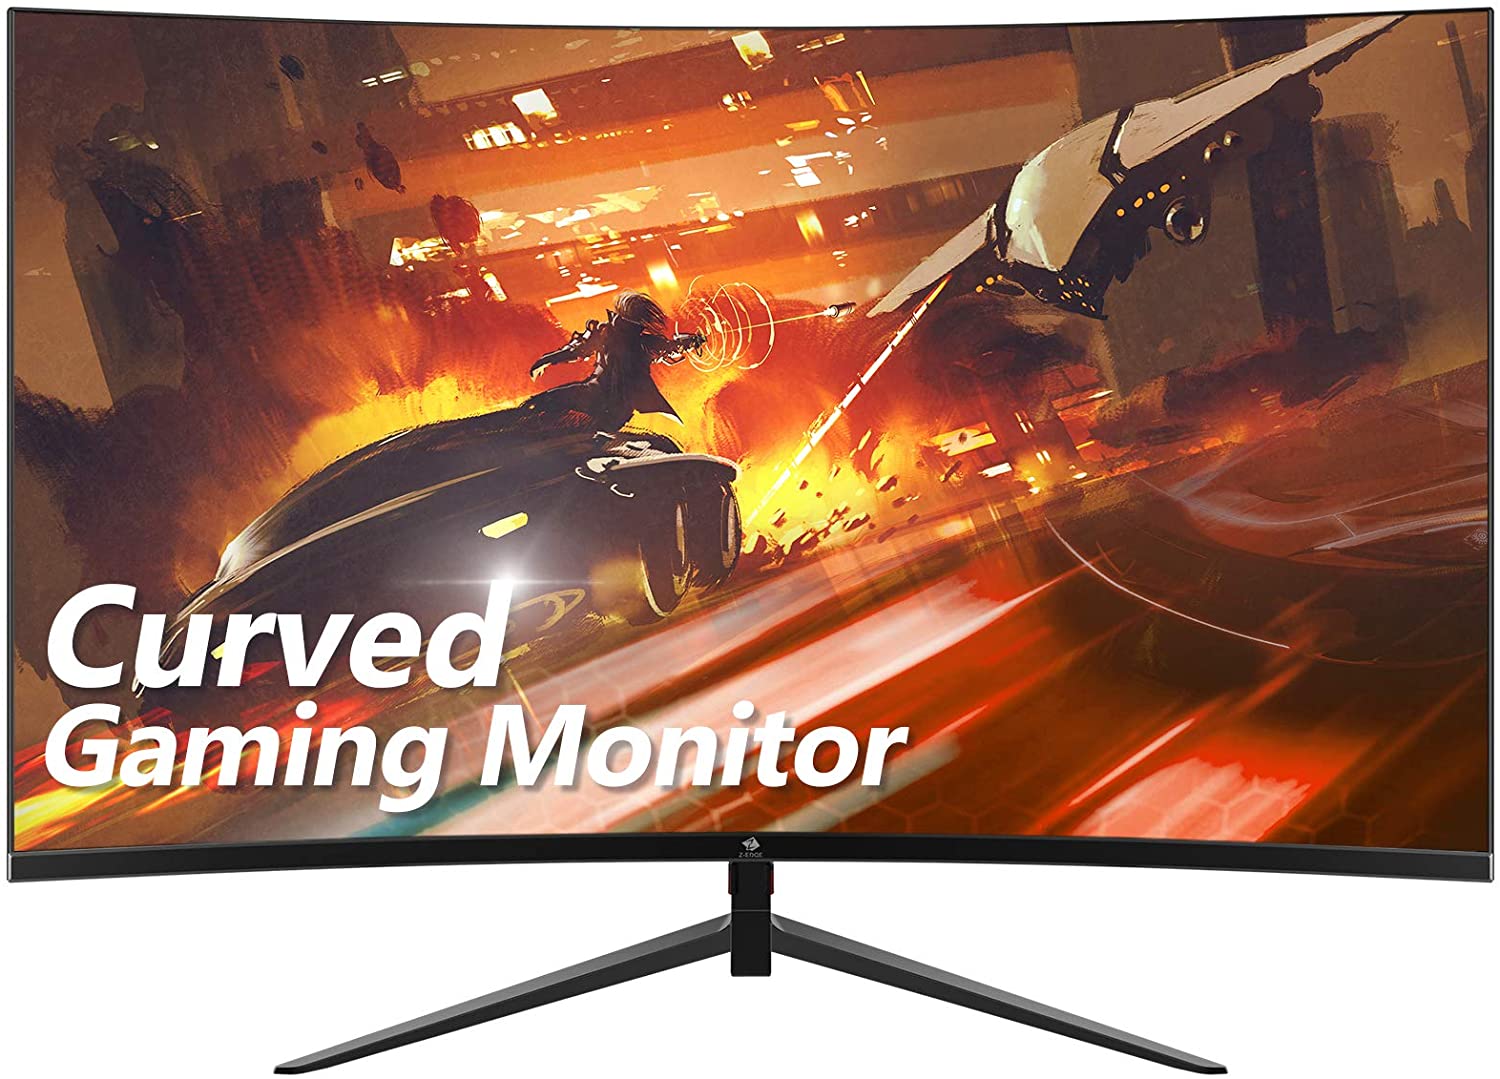 Z-Edge UG27 27-inch Curved Gaming Monitor 16:9 1920x1080 200/144Hz 1ms Frameless LED Gaming Monitor, AMD